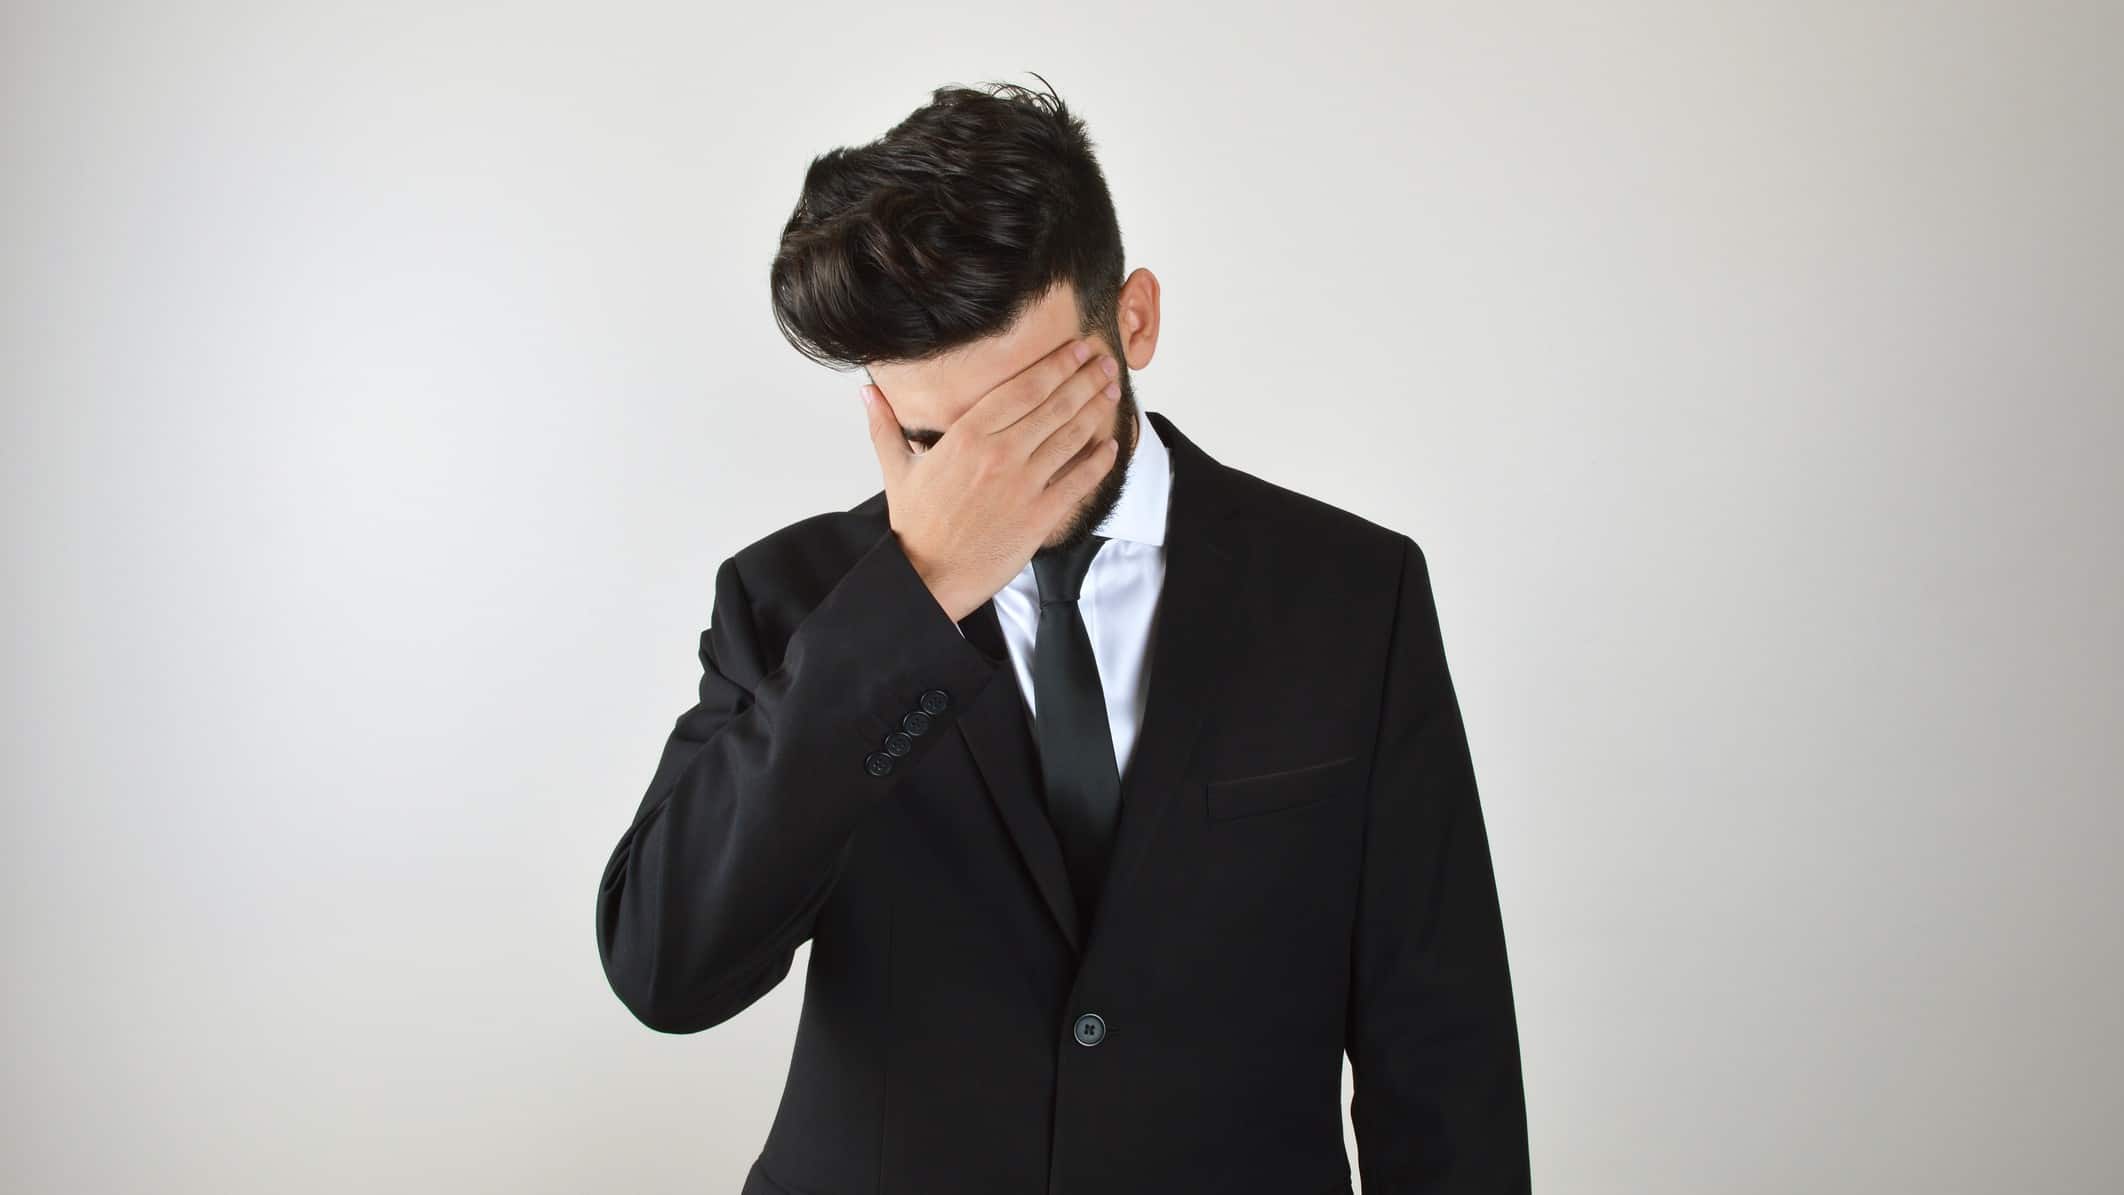 a business man in a suit holds his hand over his eyes as he bows his head in a defeated post suggesting regret and remorse.